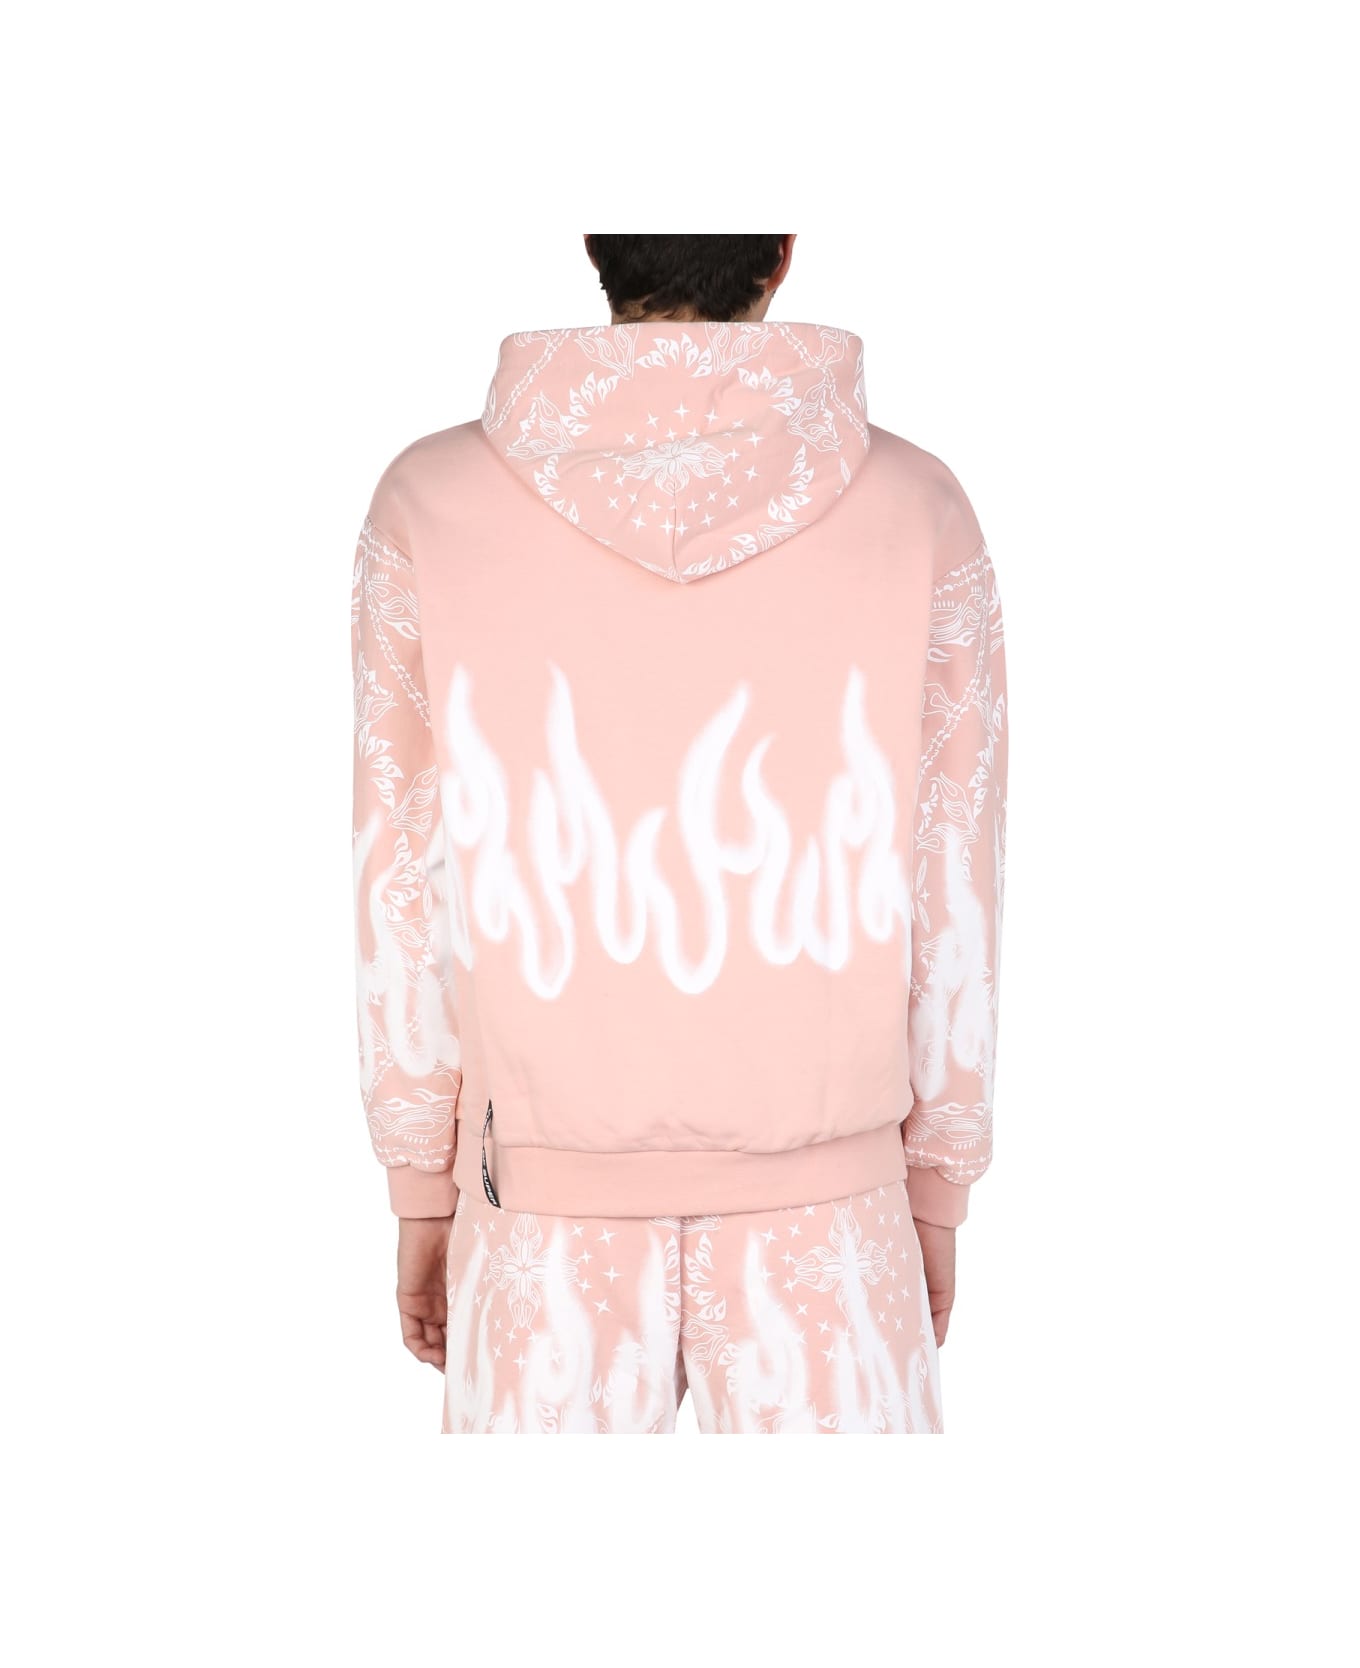 Vision of Super Sweatshirt With Paisley Pattern - PINK